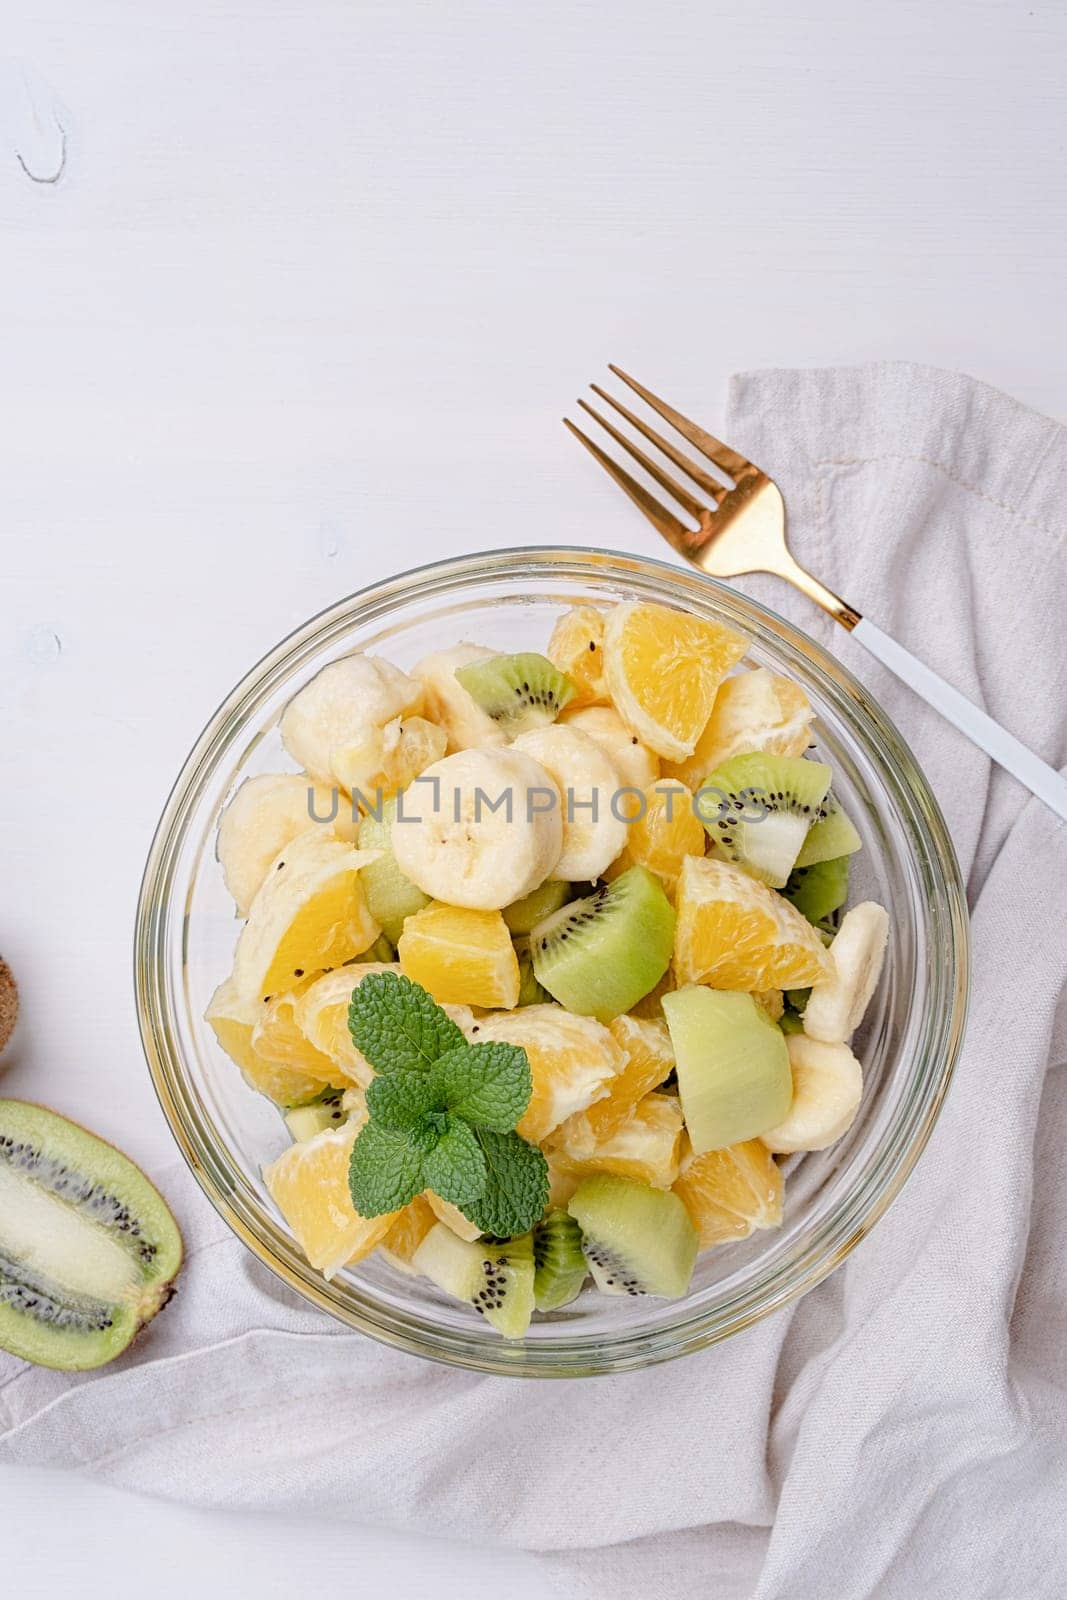 Bowl of healthy fresh fruit salad on white wooden background. Top view.